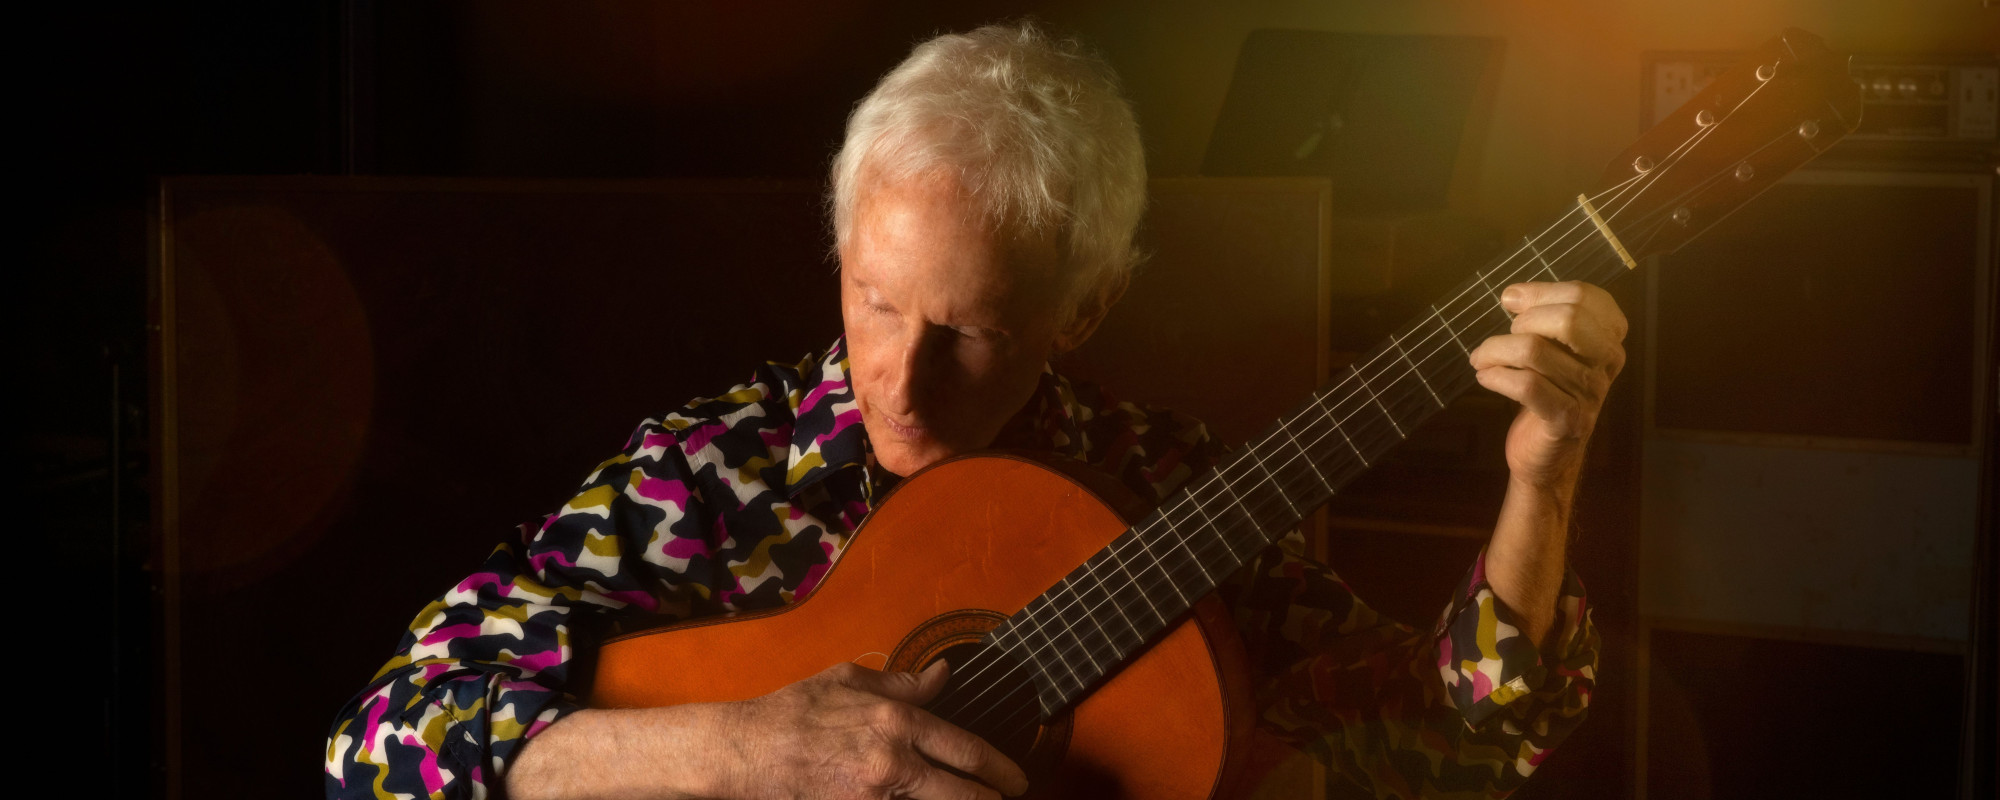 Robby Krieger: Writing on the Storm